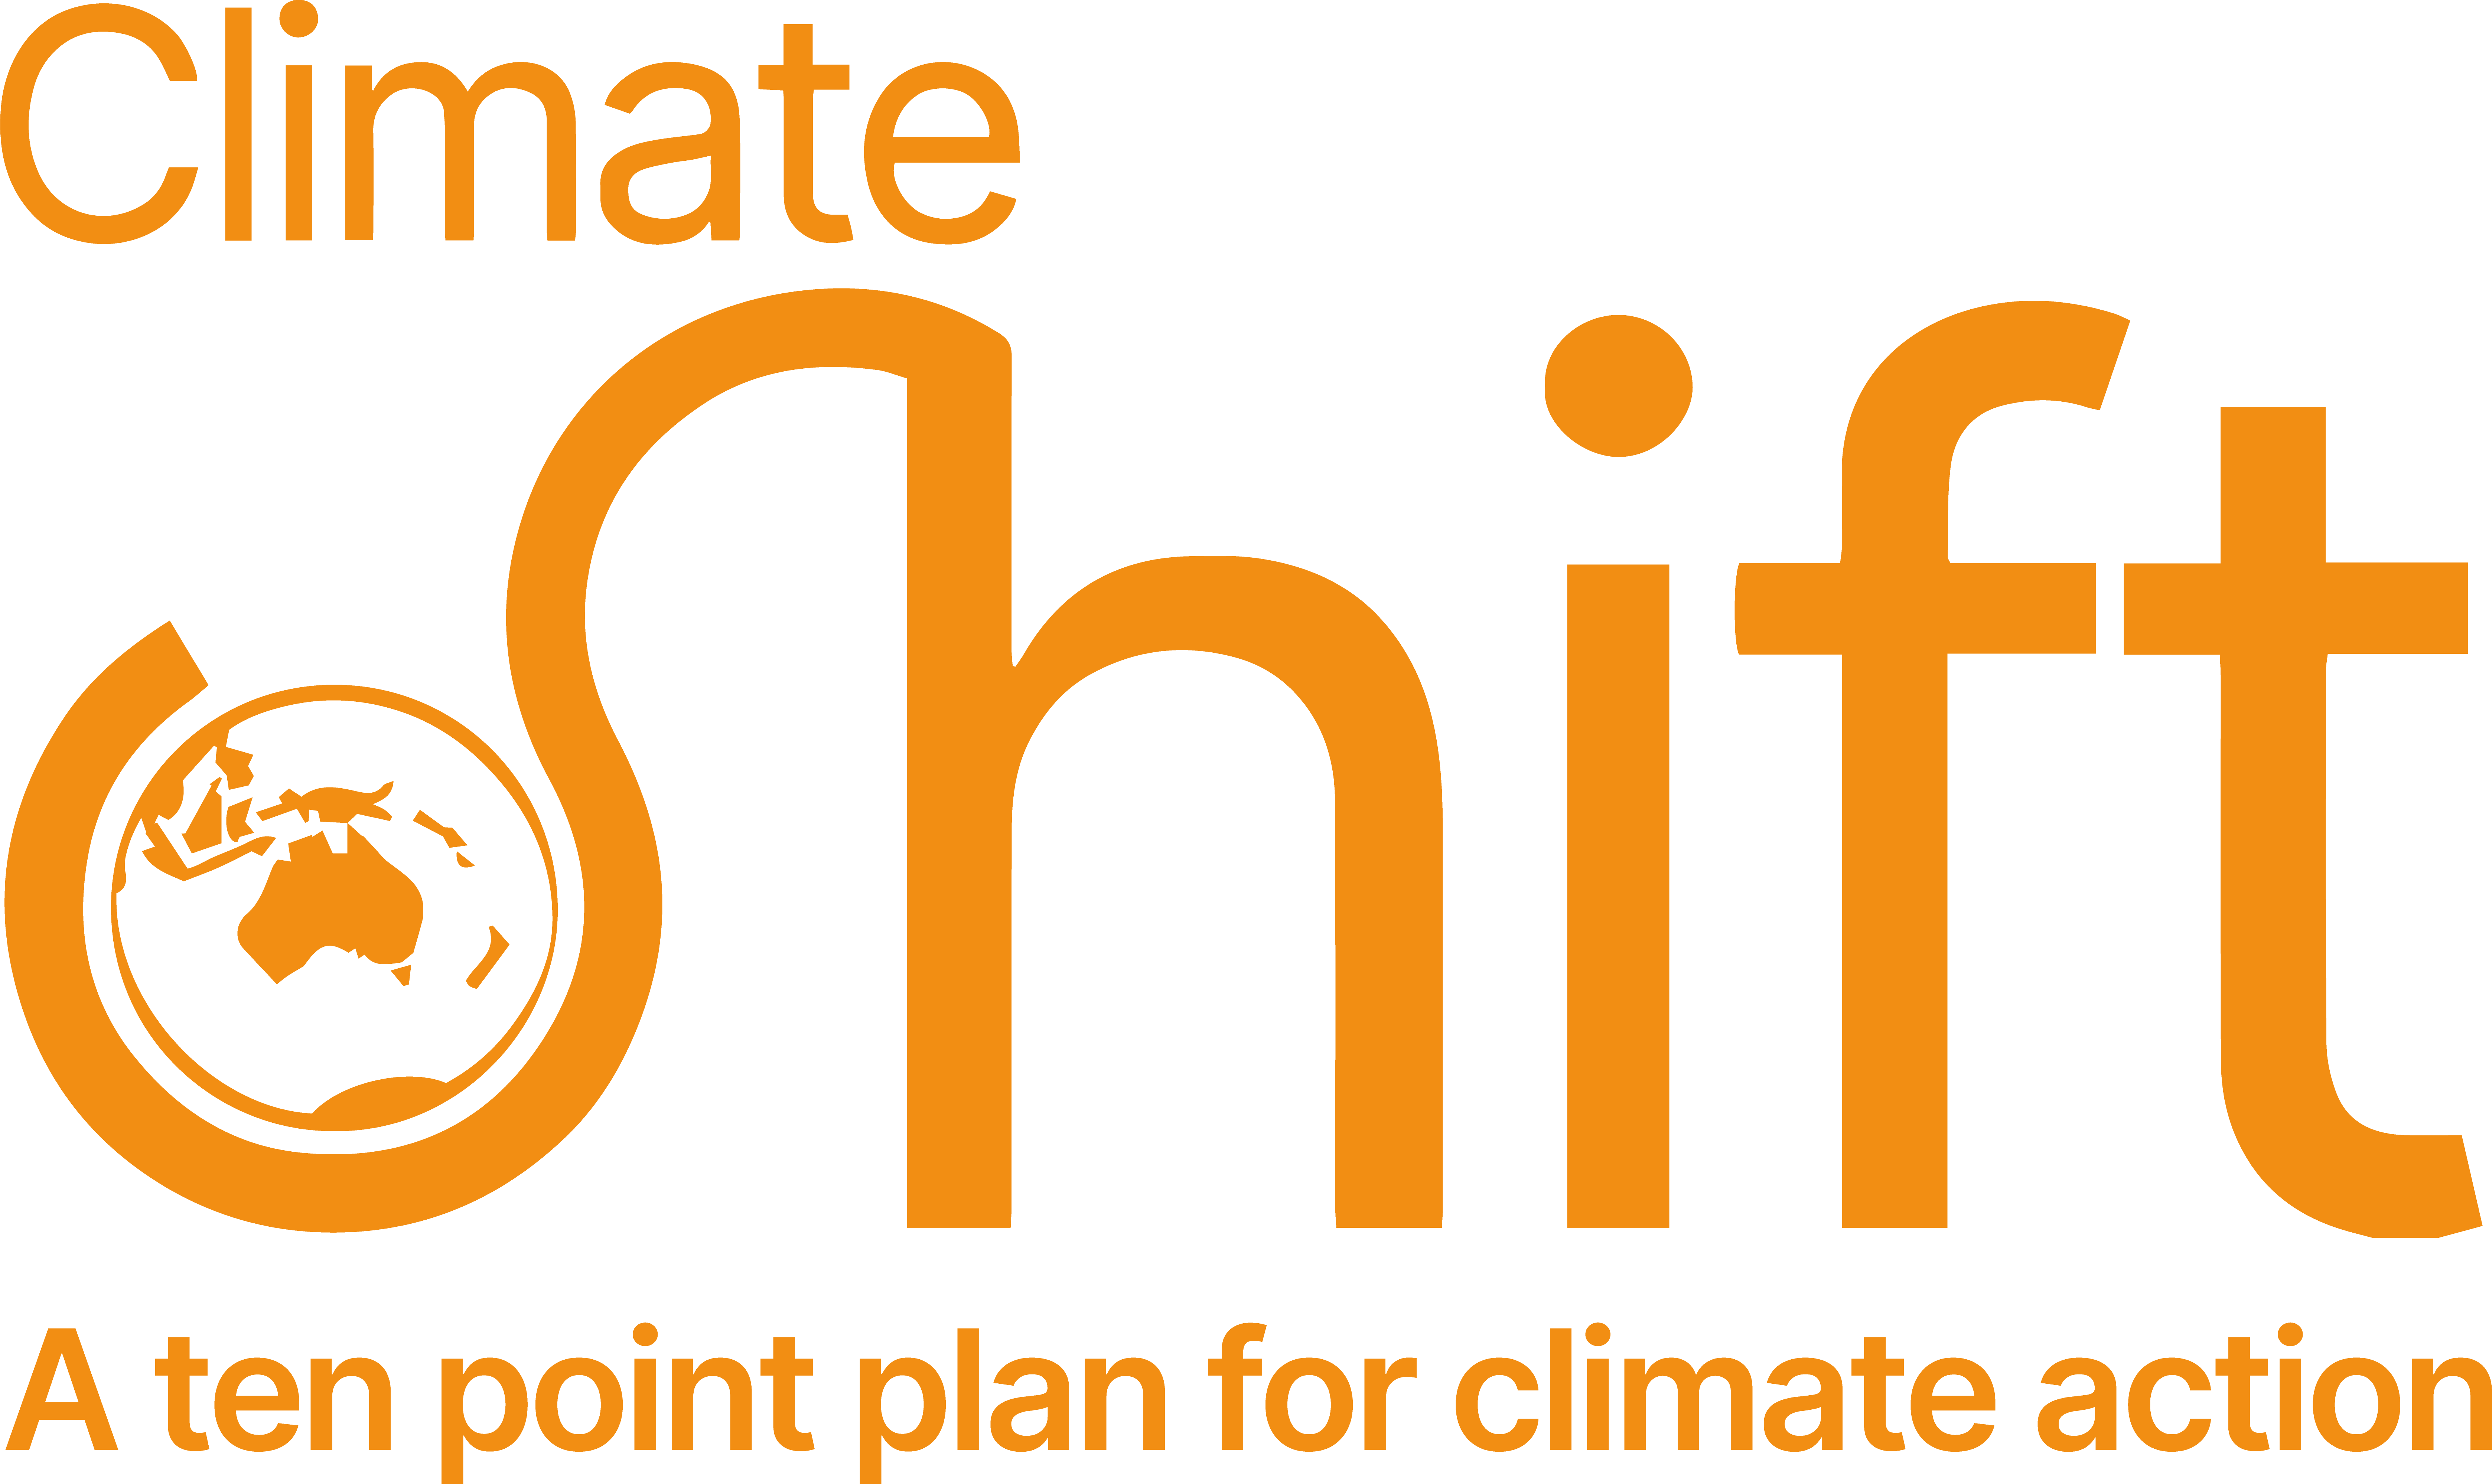 Climate Shift - a ten point plan for climate action